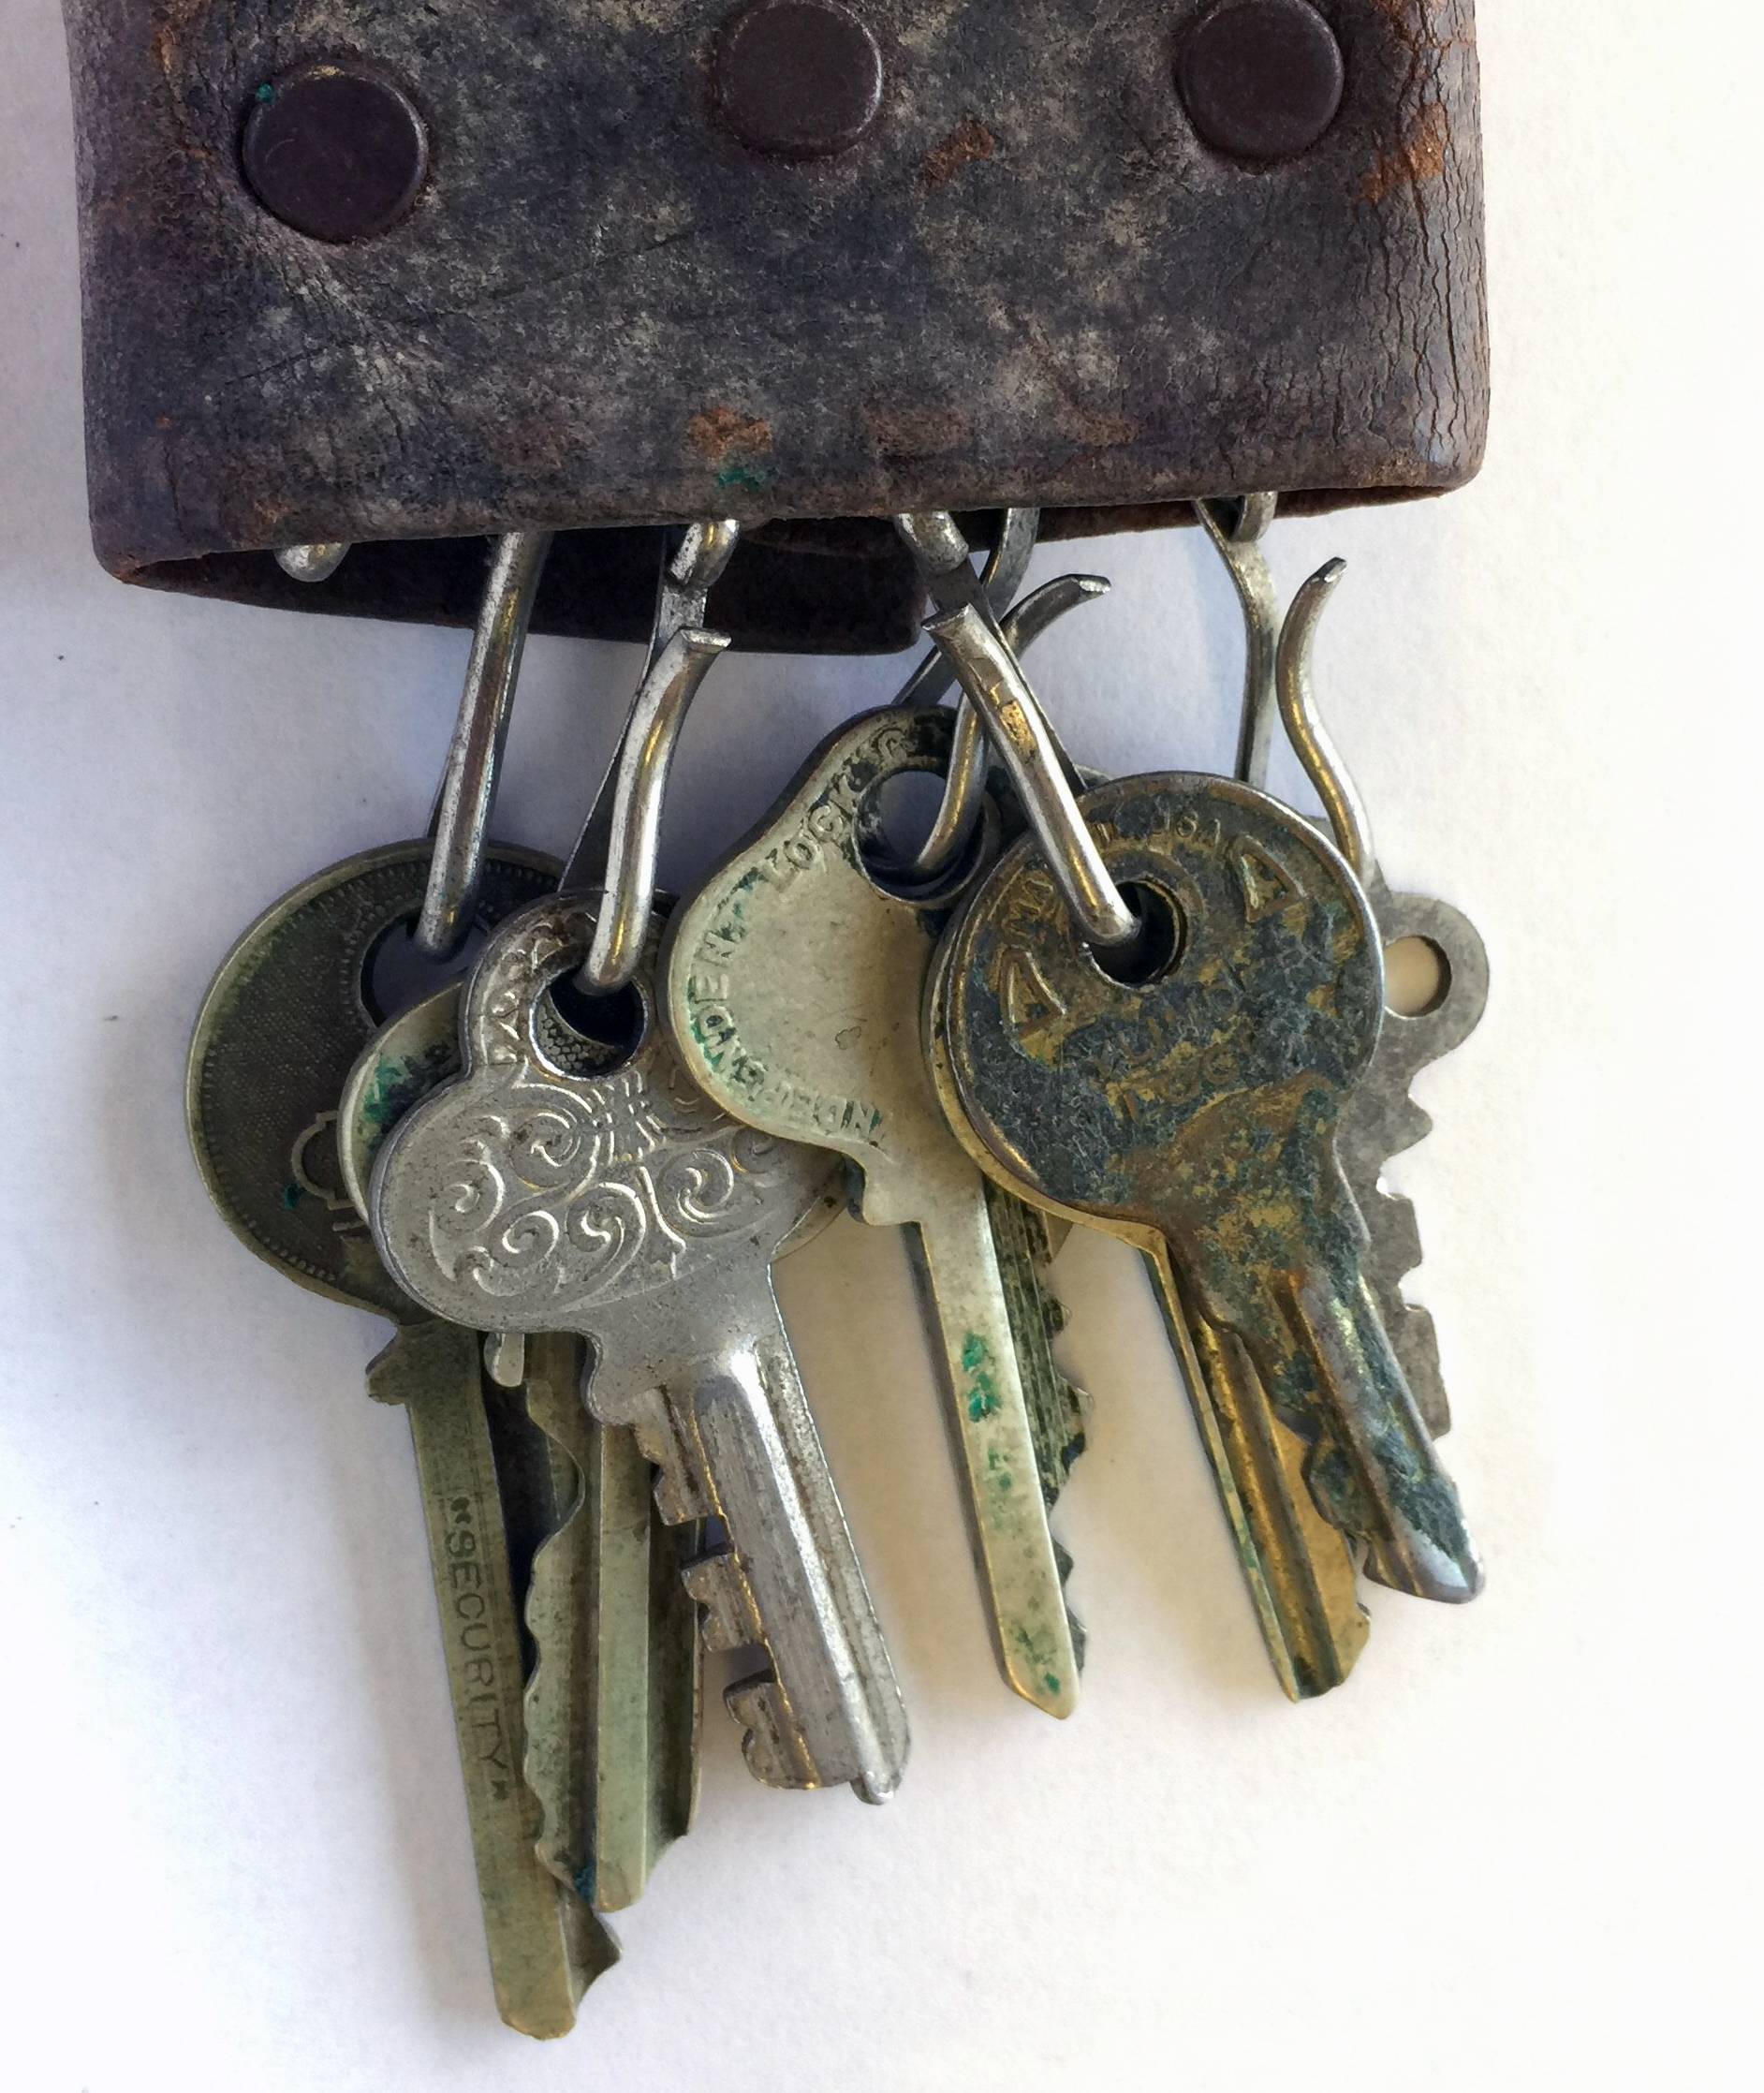 Photograph of President Evans' keys held in a leather key wallet